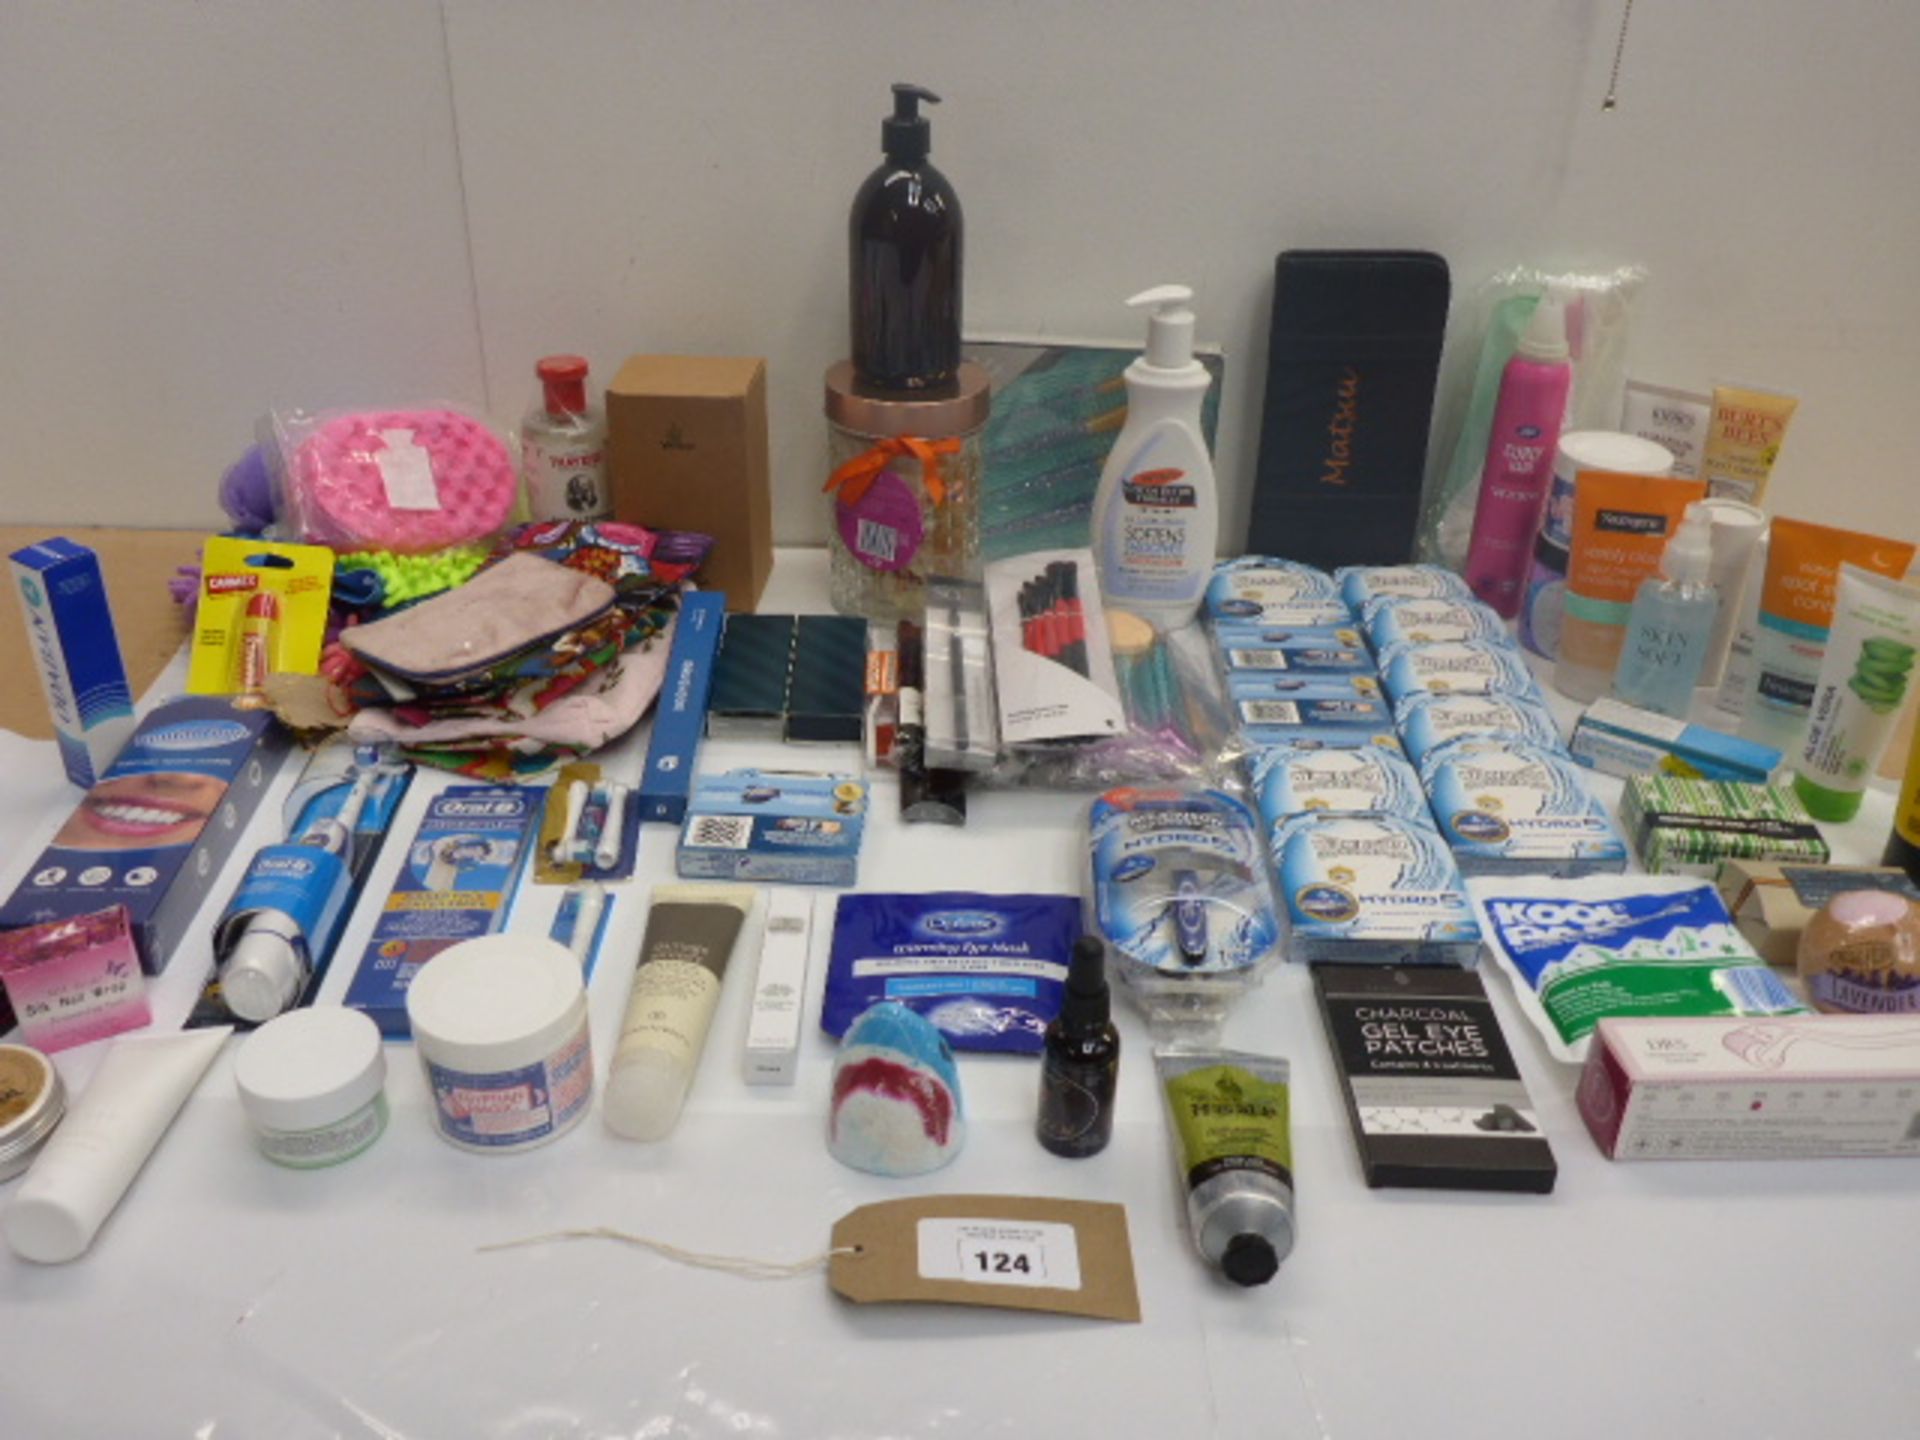 Bag containing razors, toothbrushes, makeup bags, cotton buds, soap, bath bombs, creams, lotions and